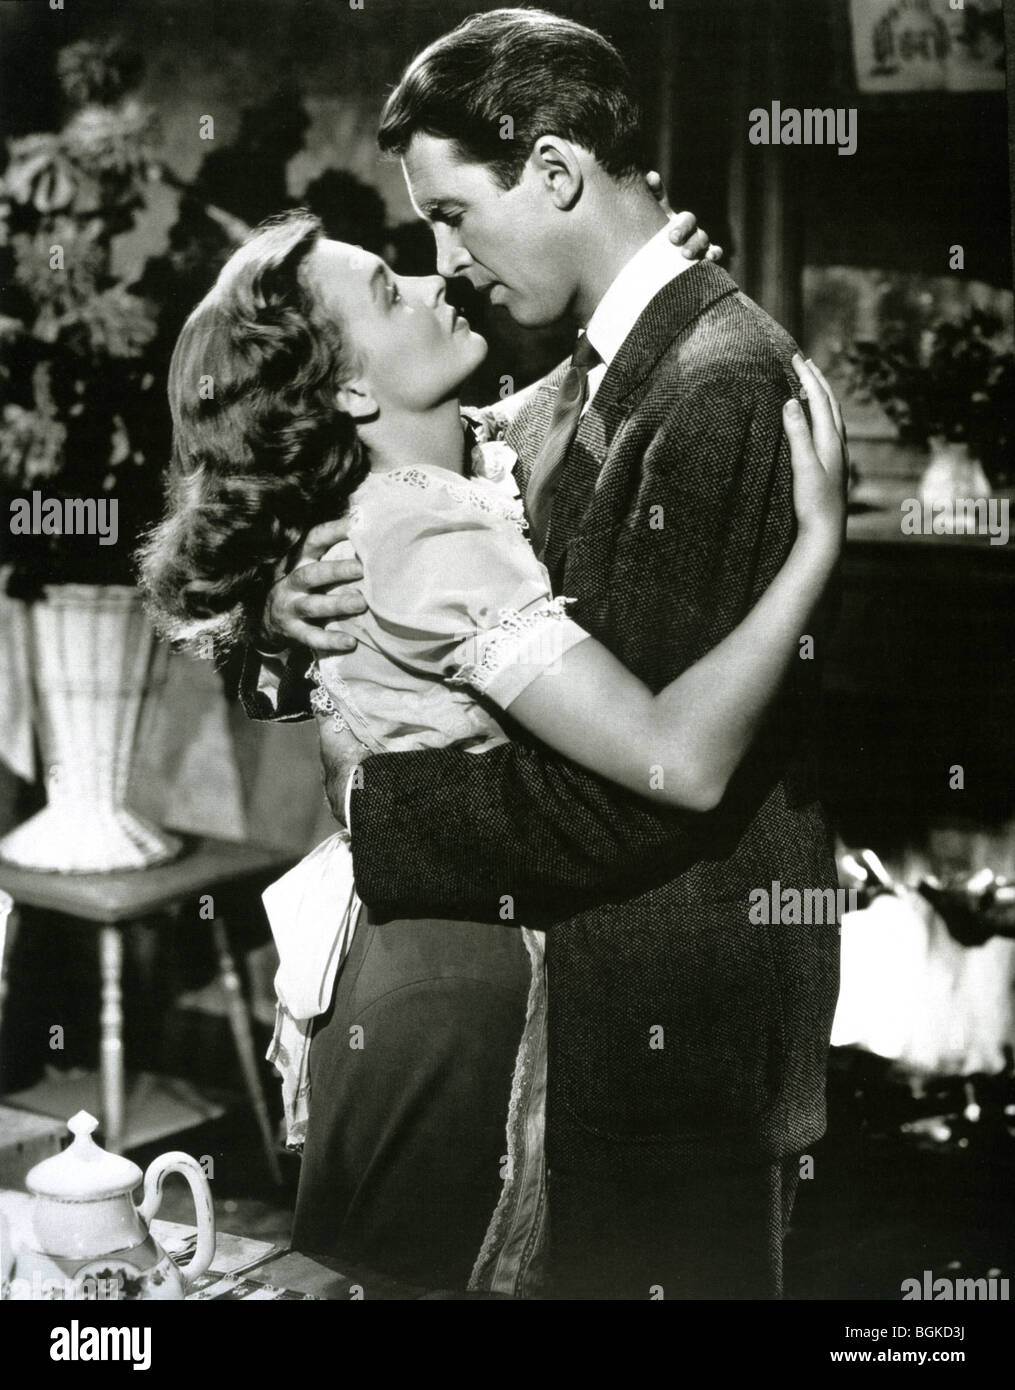 IT'S A WONDERFUL LIFE - 1946 RKO film with James Stewart and Donna Reed Stock Photo